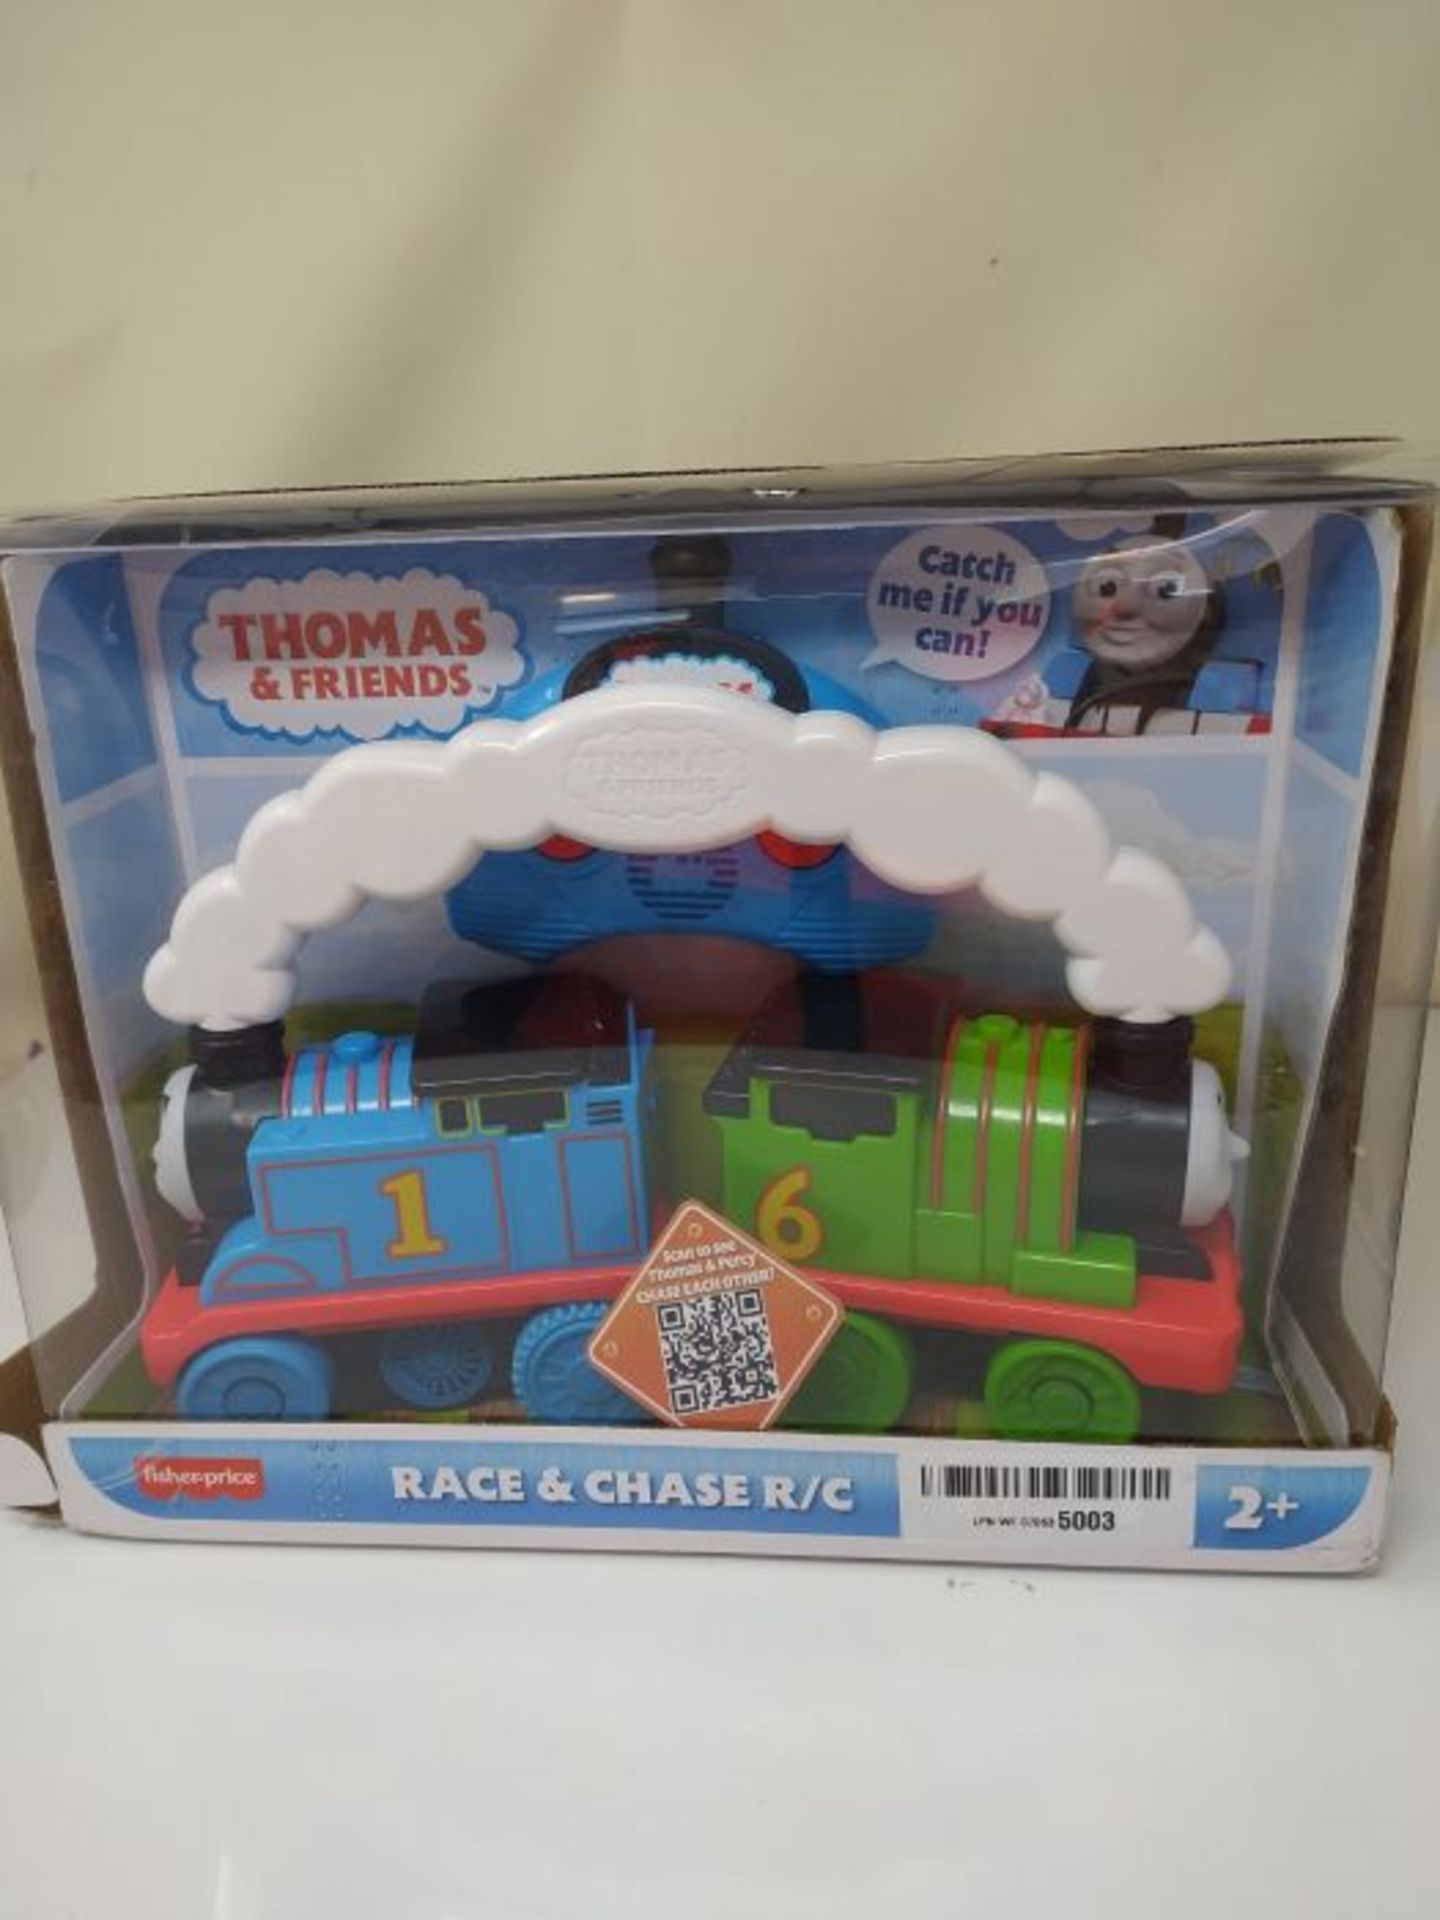 Fisher-Price Thomas & Friends Race & Chase R/C - UK English Edition, remote control - Image 2 of 2